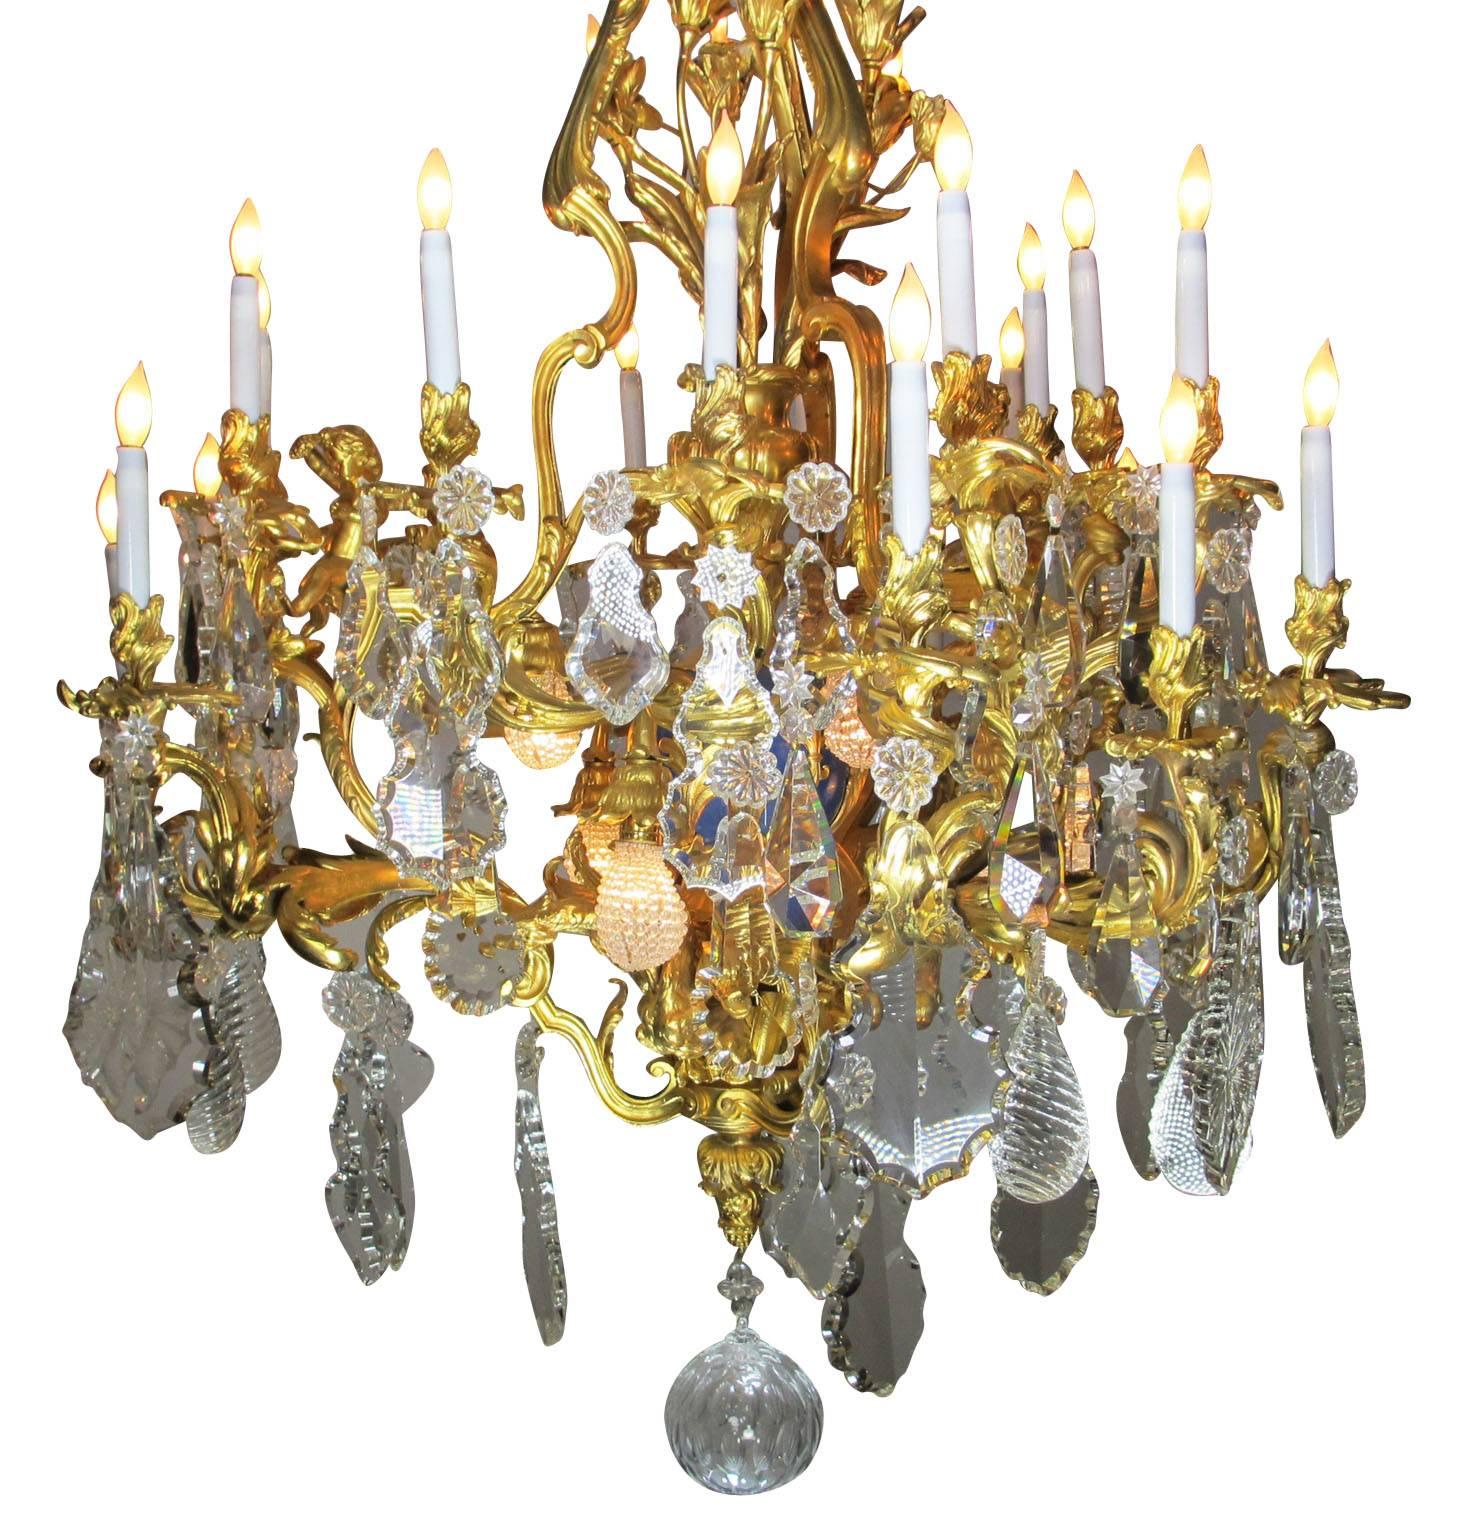 Carved French 19th Century Louis XV Style Cherub & Dragons Ormolu & Crystal Chandelier For Sale